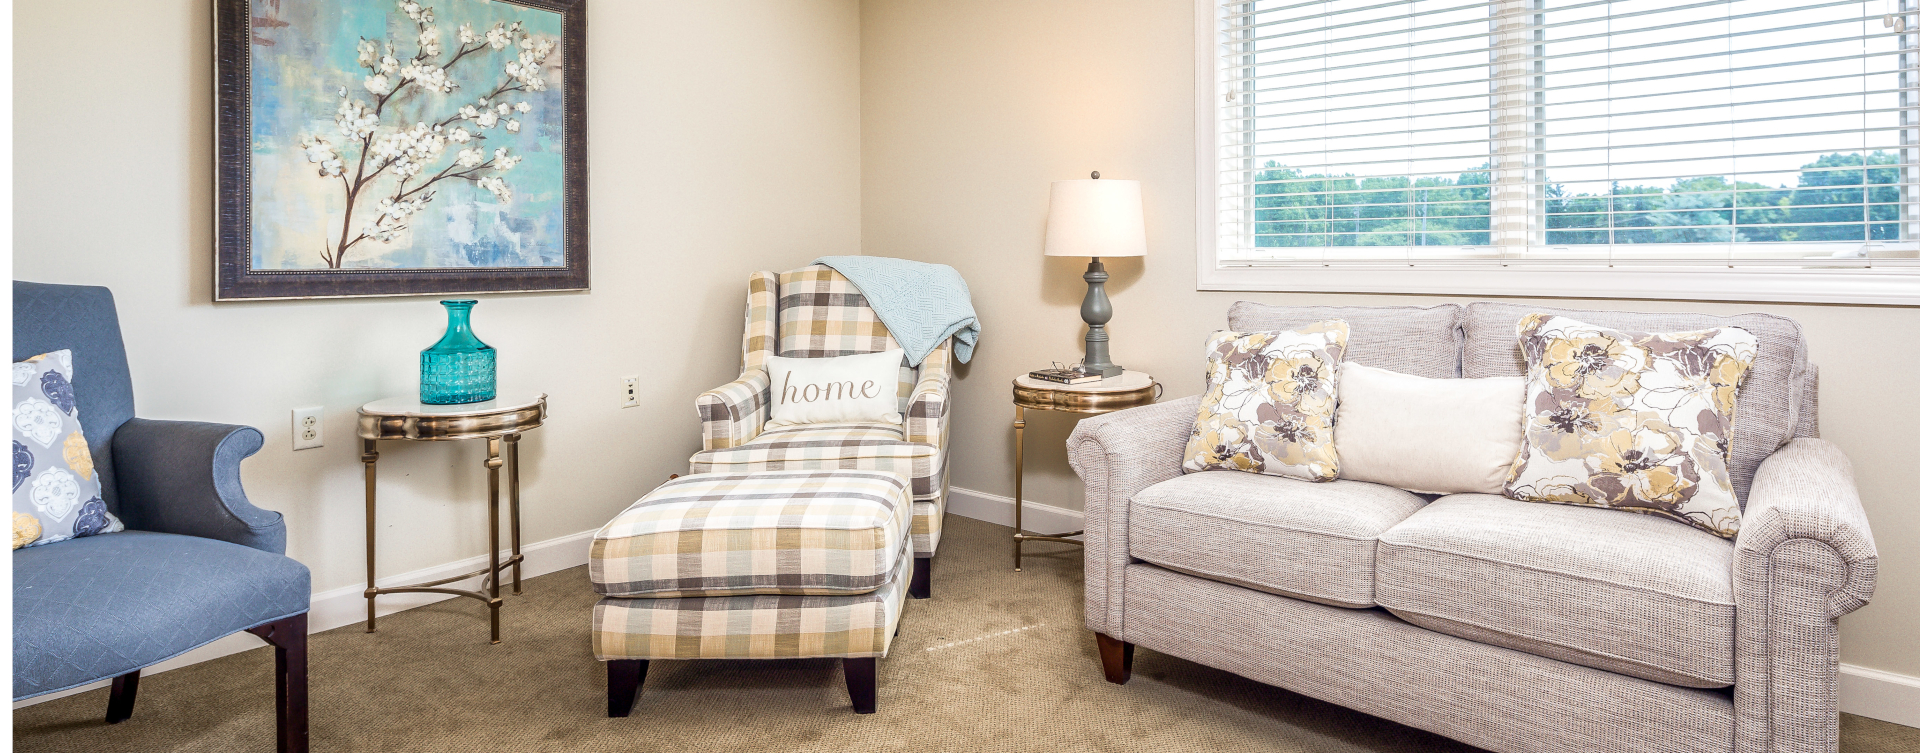 Enjoy senior friendly amenities, personal climate control and security in an apartment at Bickford of West Lansing